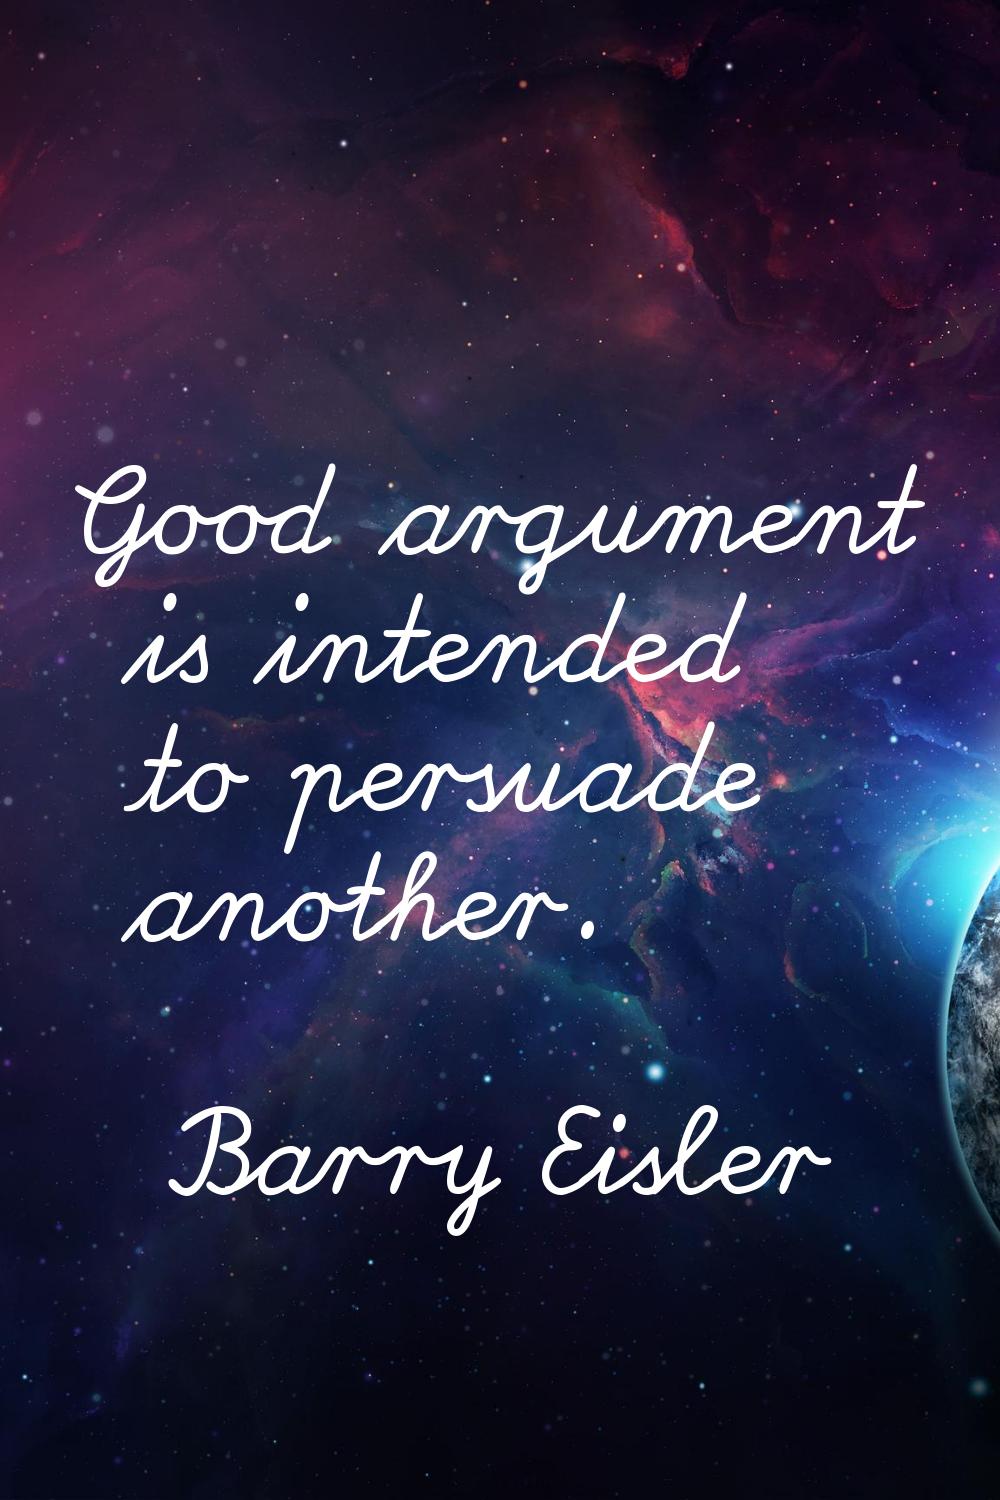 Good argument is intended to persuade another.